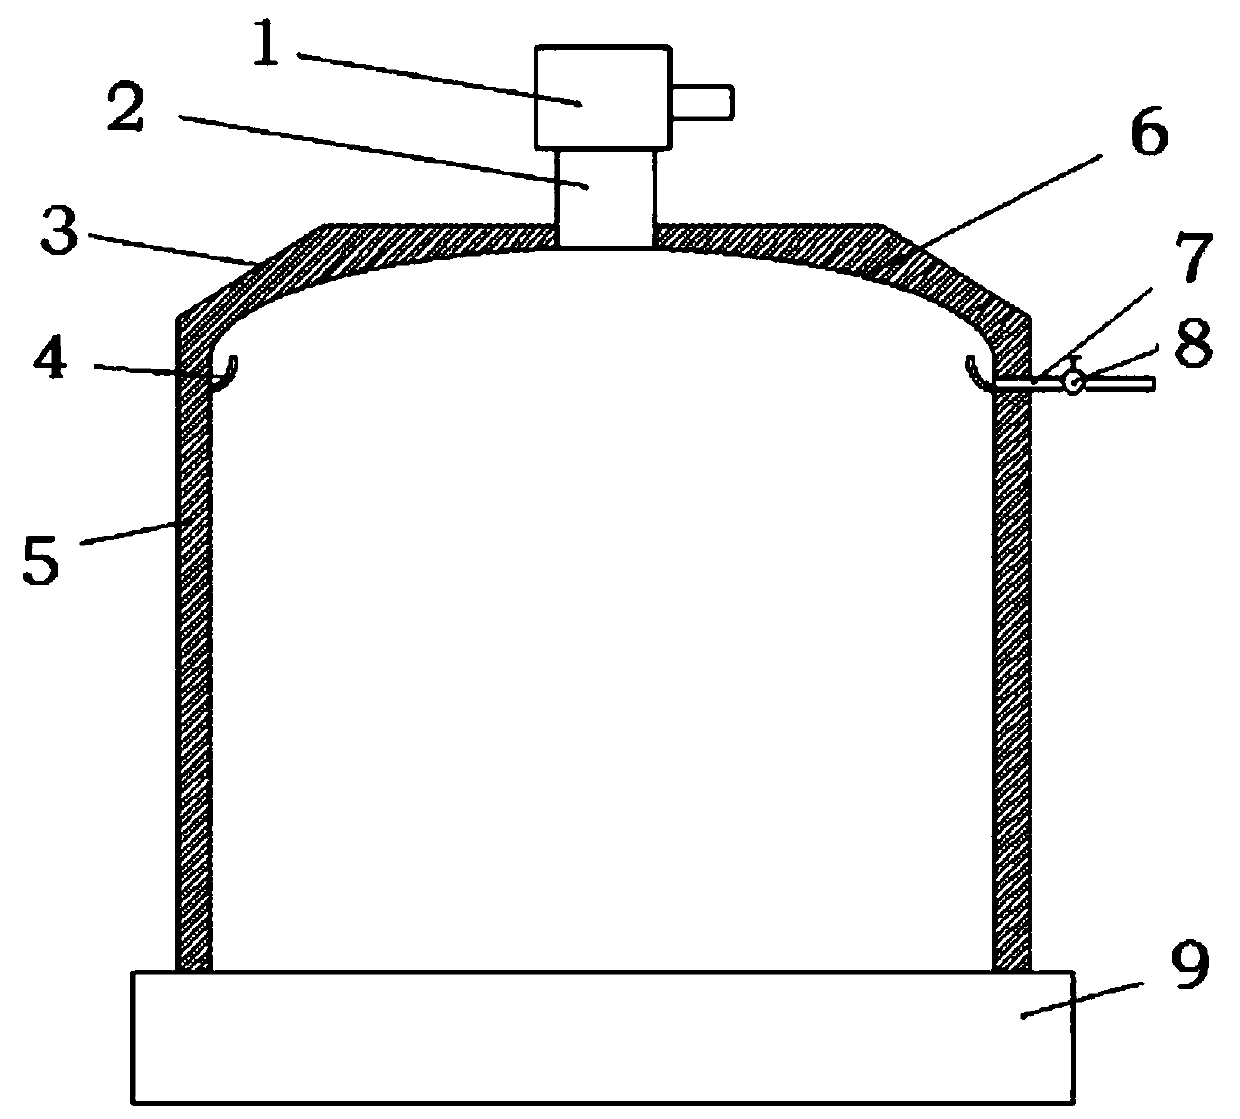 Stabilizer condensate water separation device